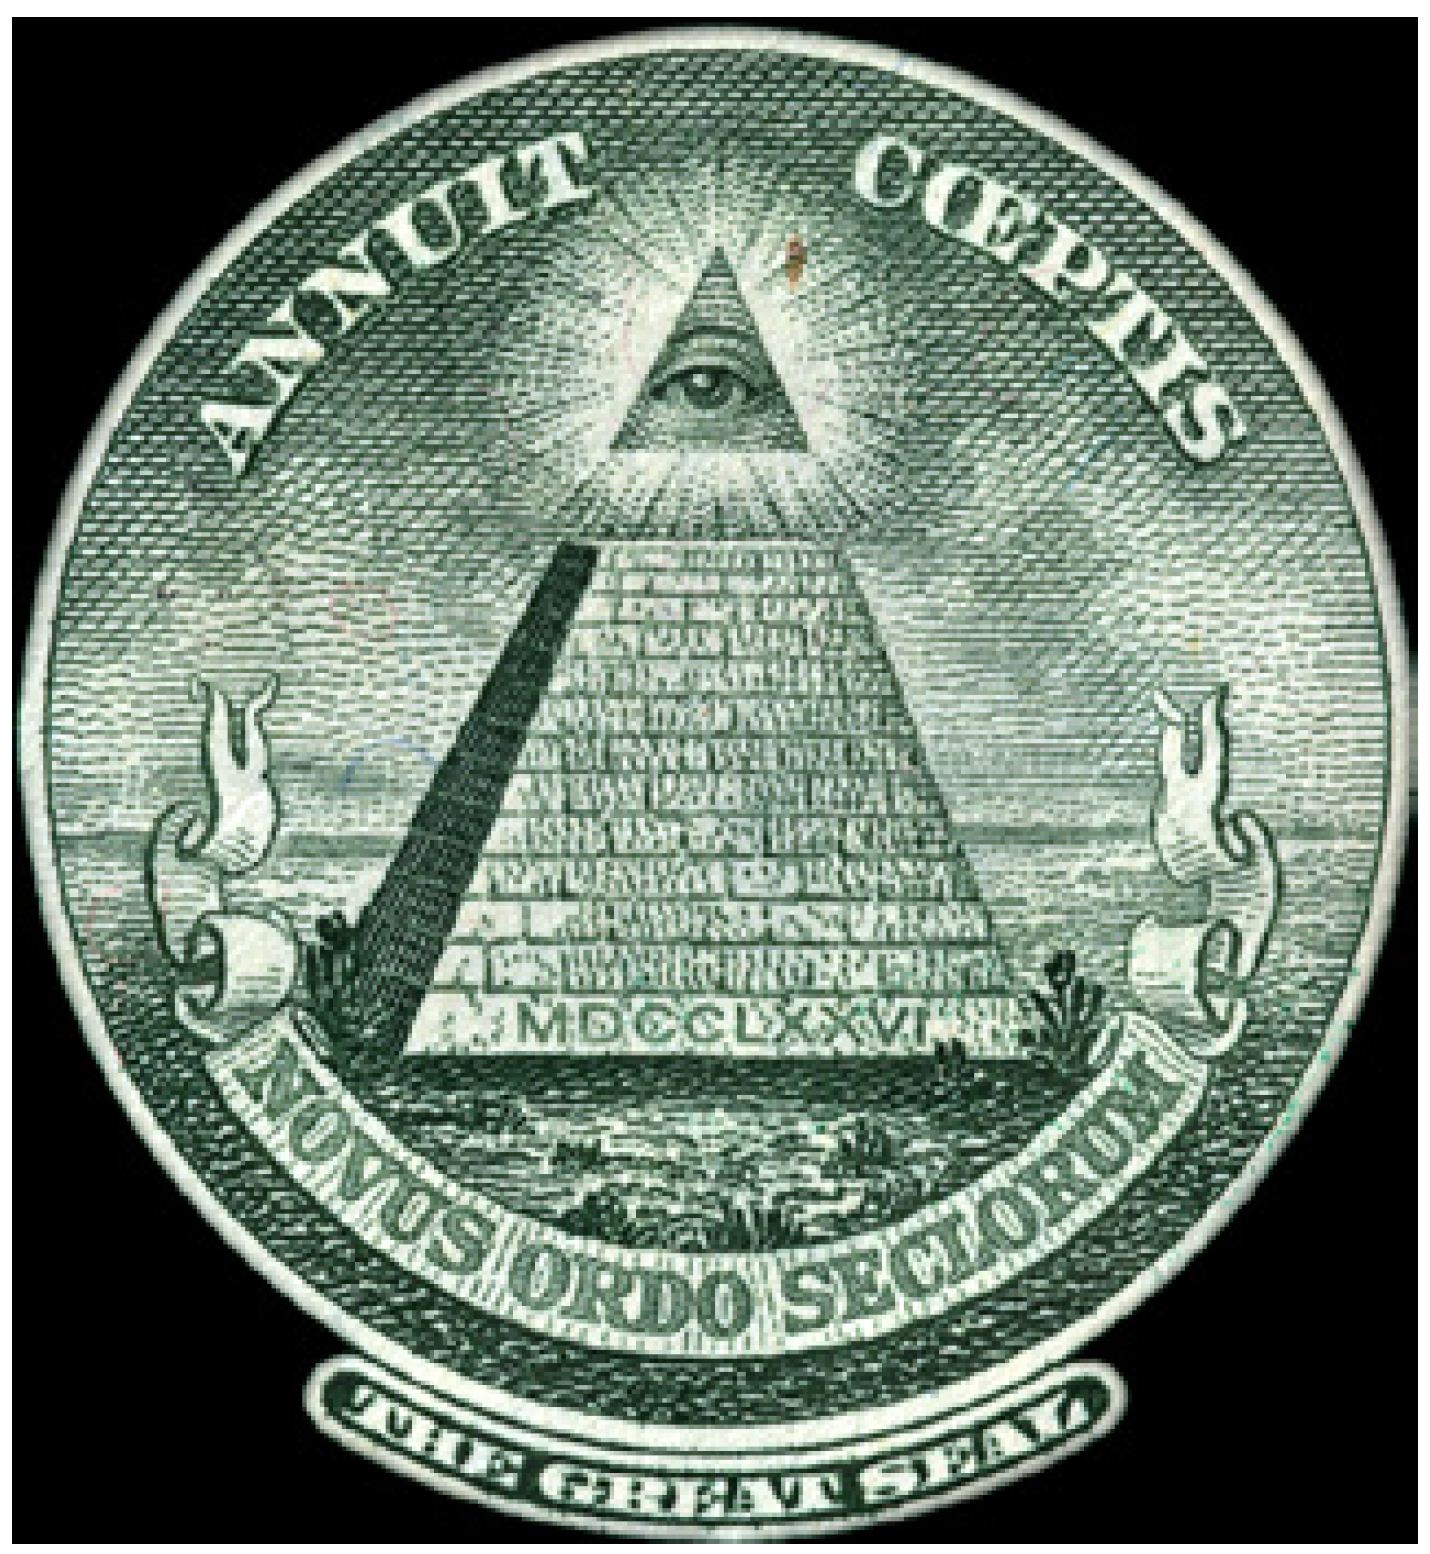 All seeing Eye | THE MAIN IDEA IN PICTURES